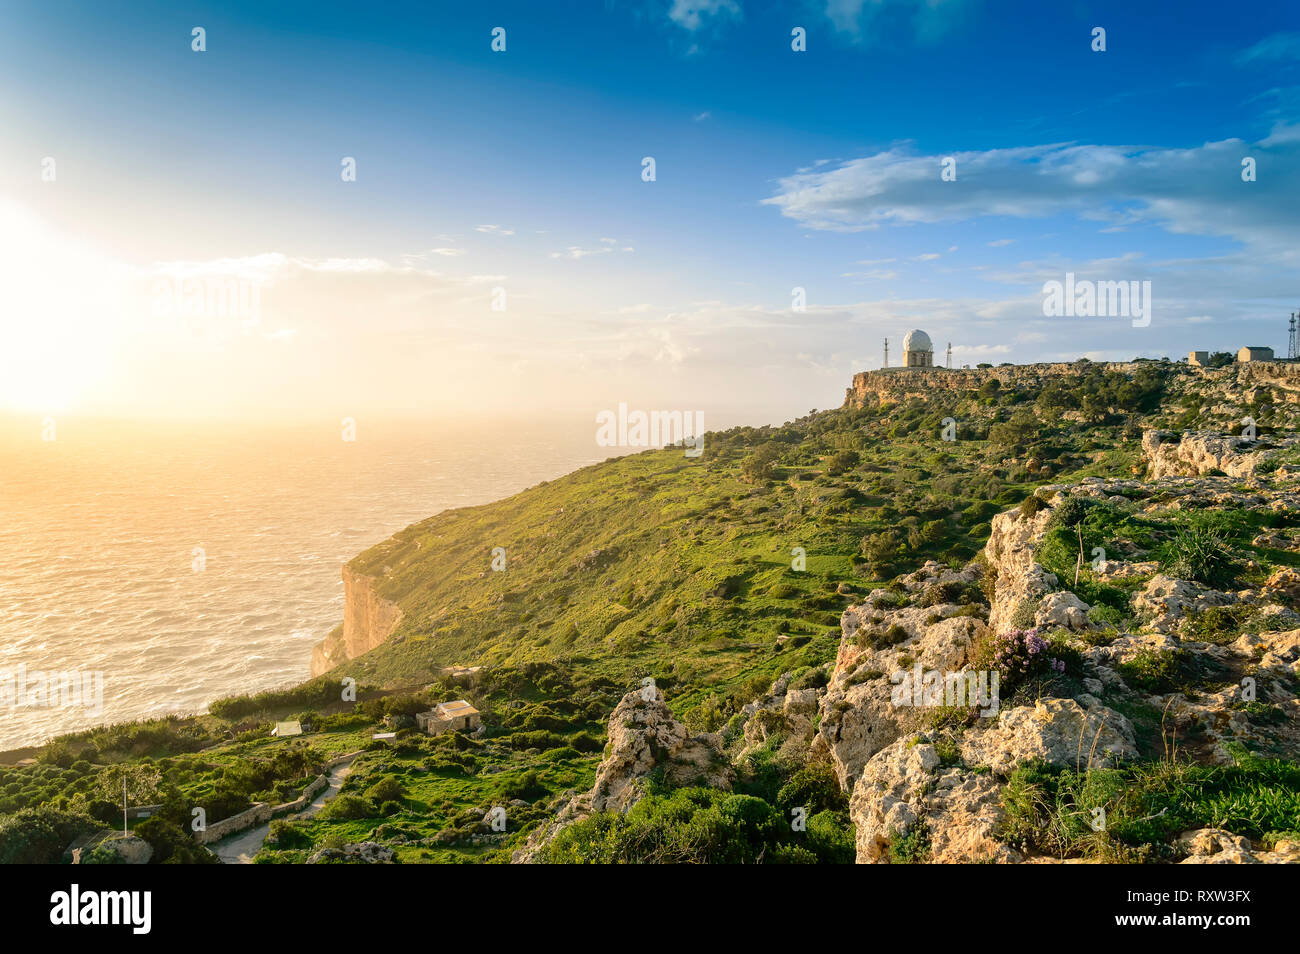 Dingli Cliffs, Malta: Panoramic road with a romantic view over Dingli Cliffs and Aviation radar at sunset Stock Photo